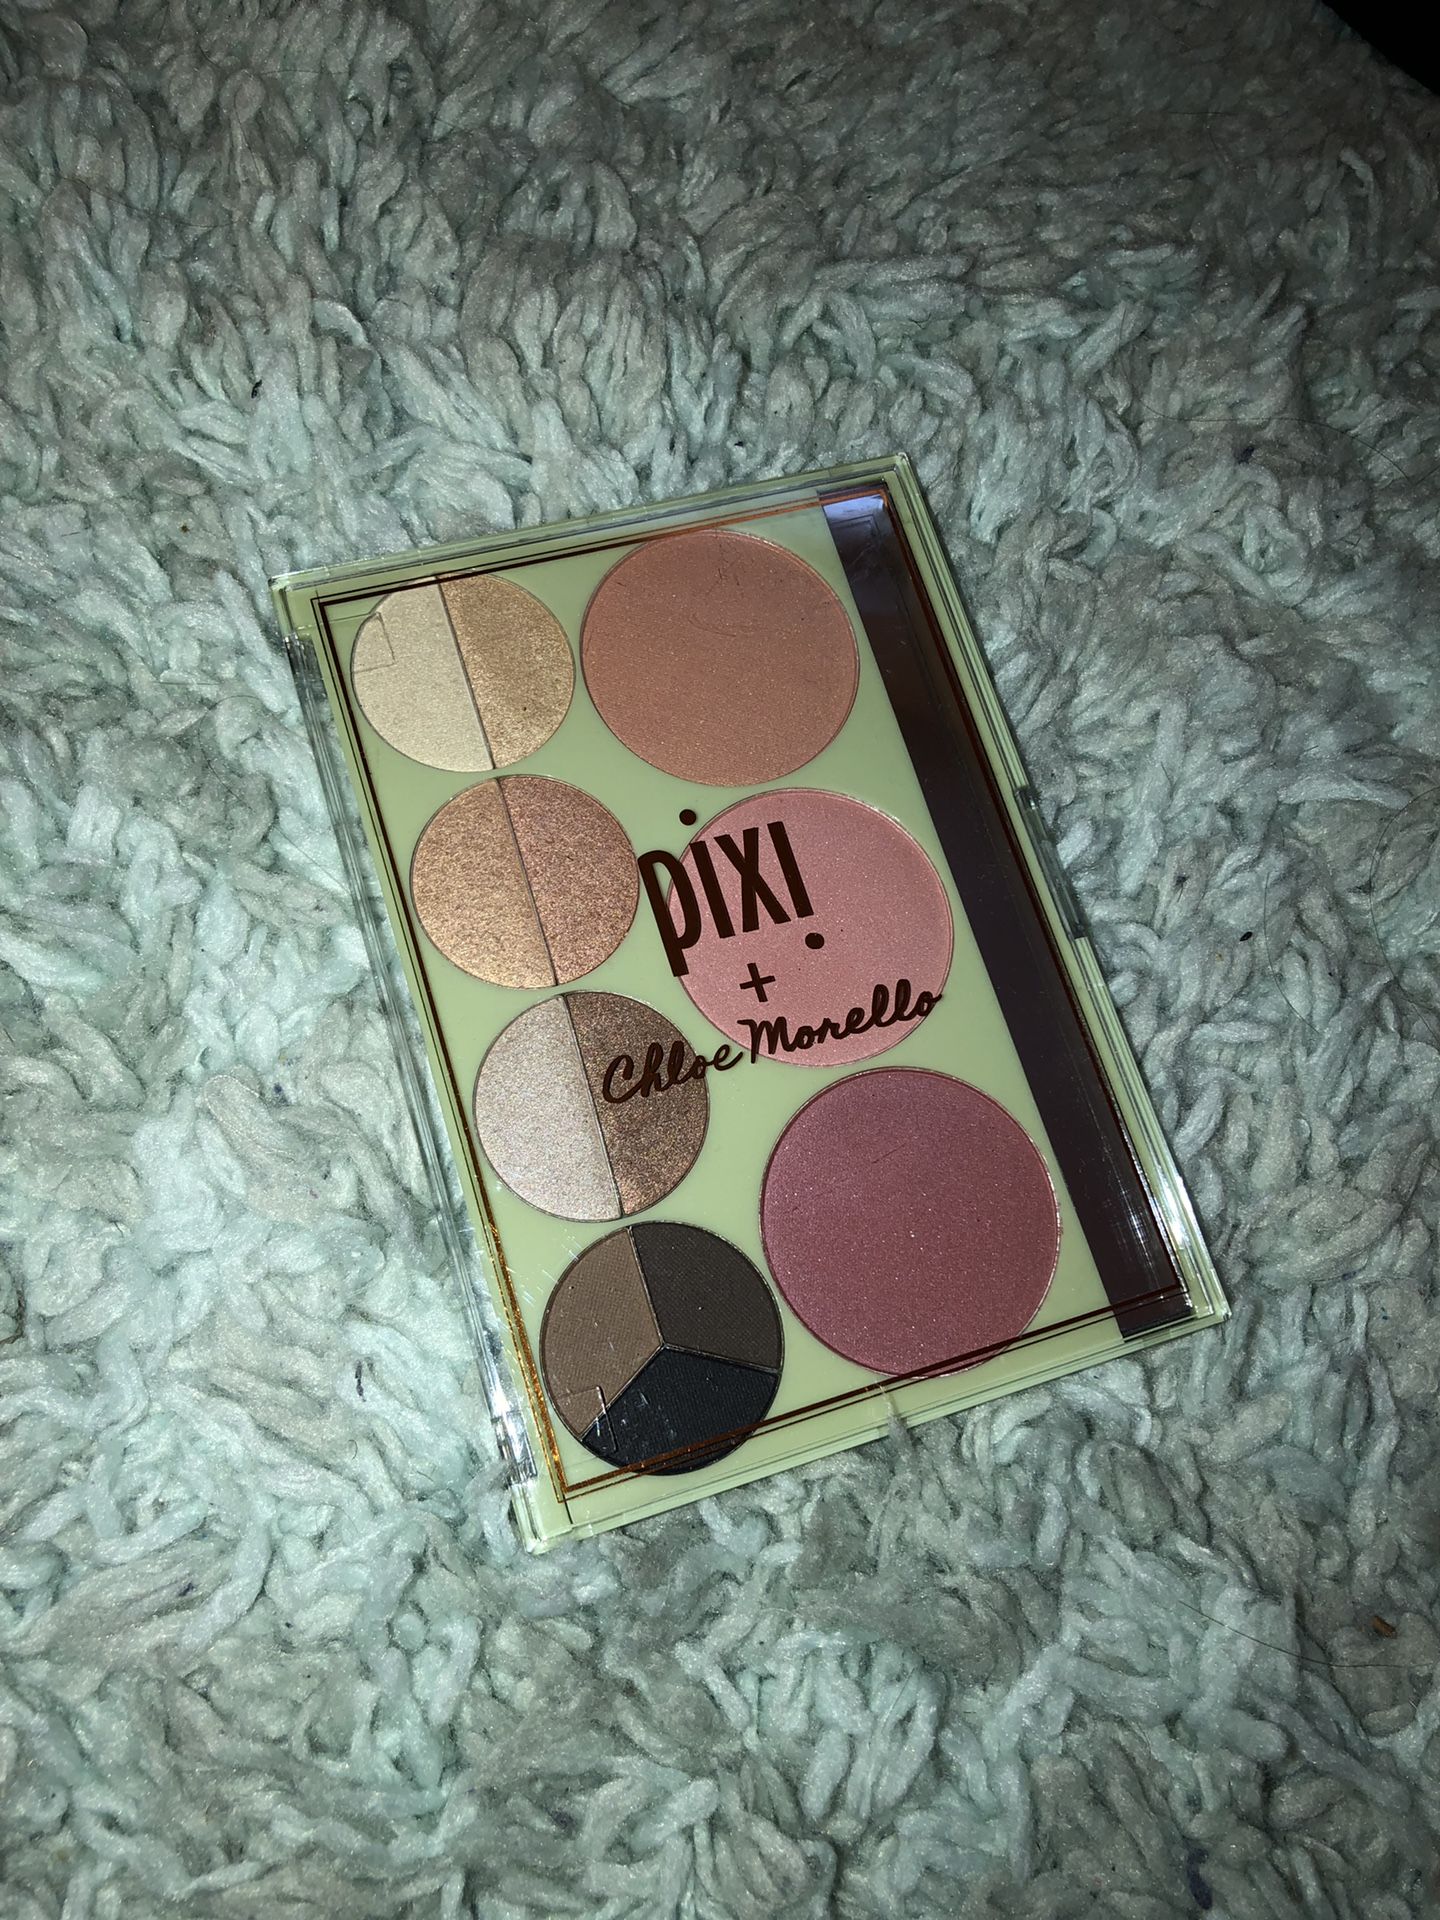 Pixi Beauty Chloe Morello face and eyeshadow palette